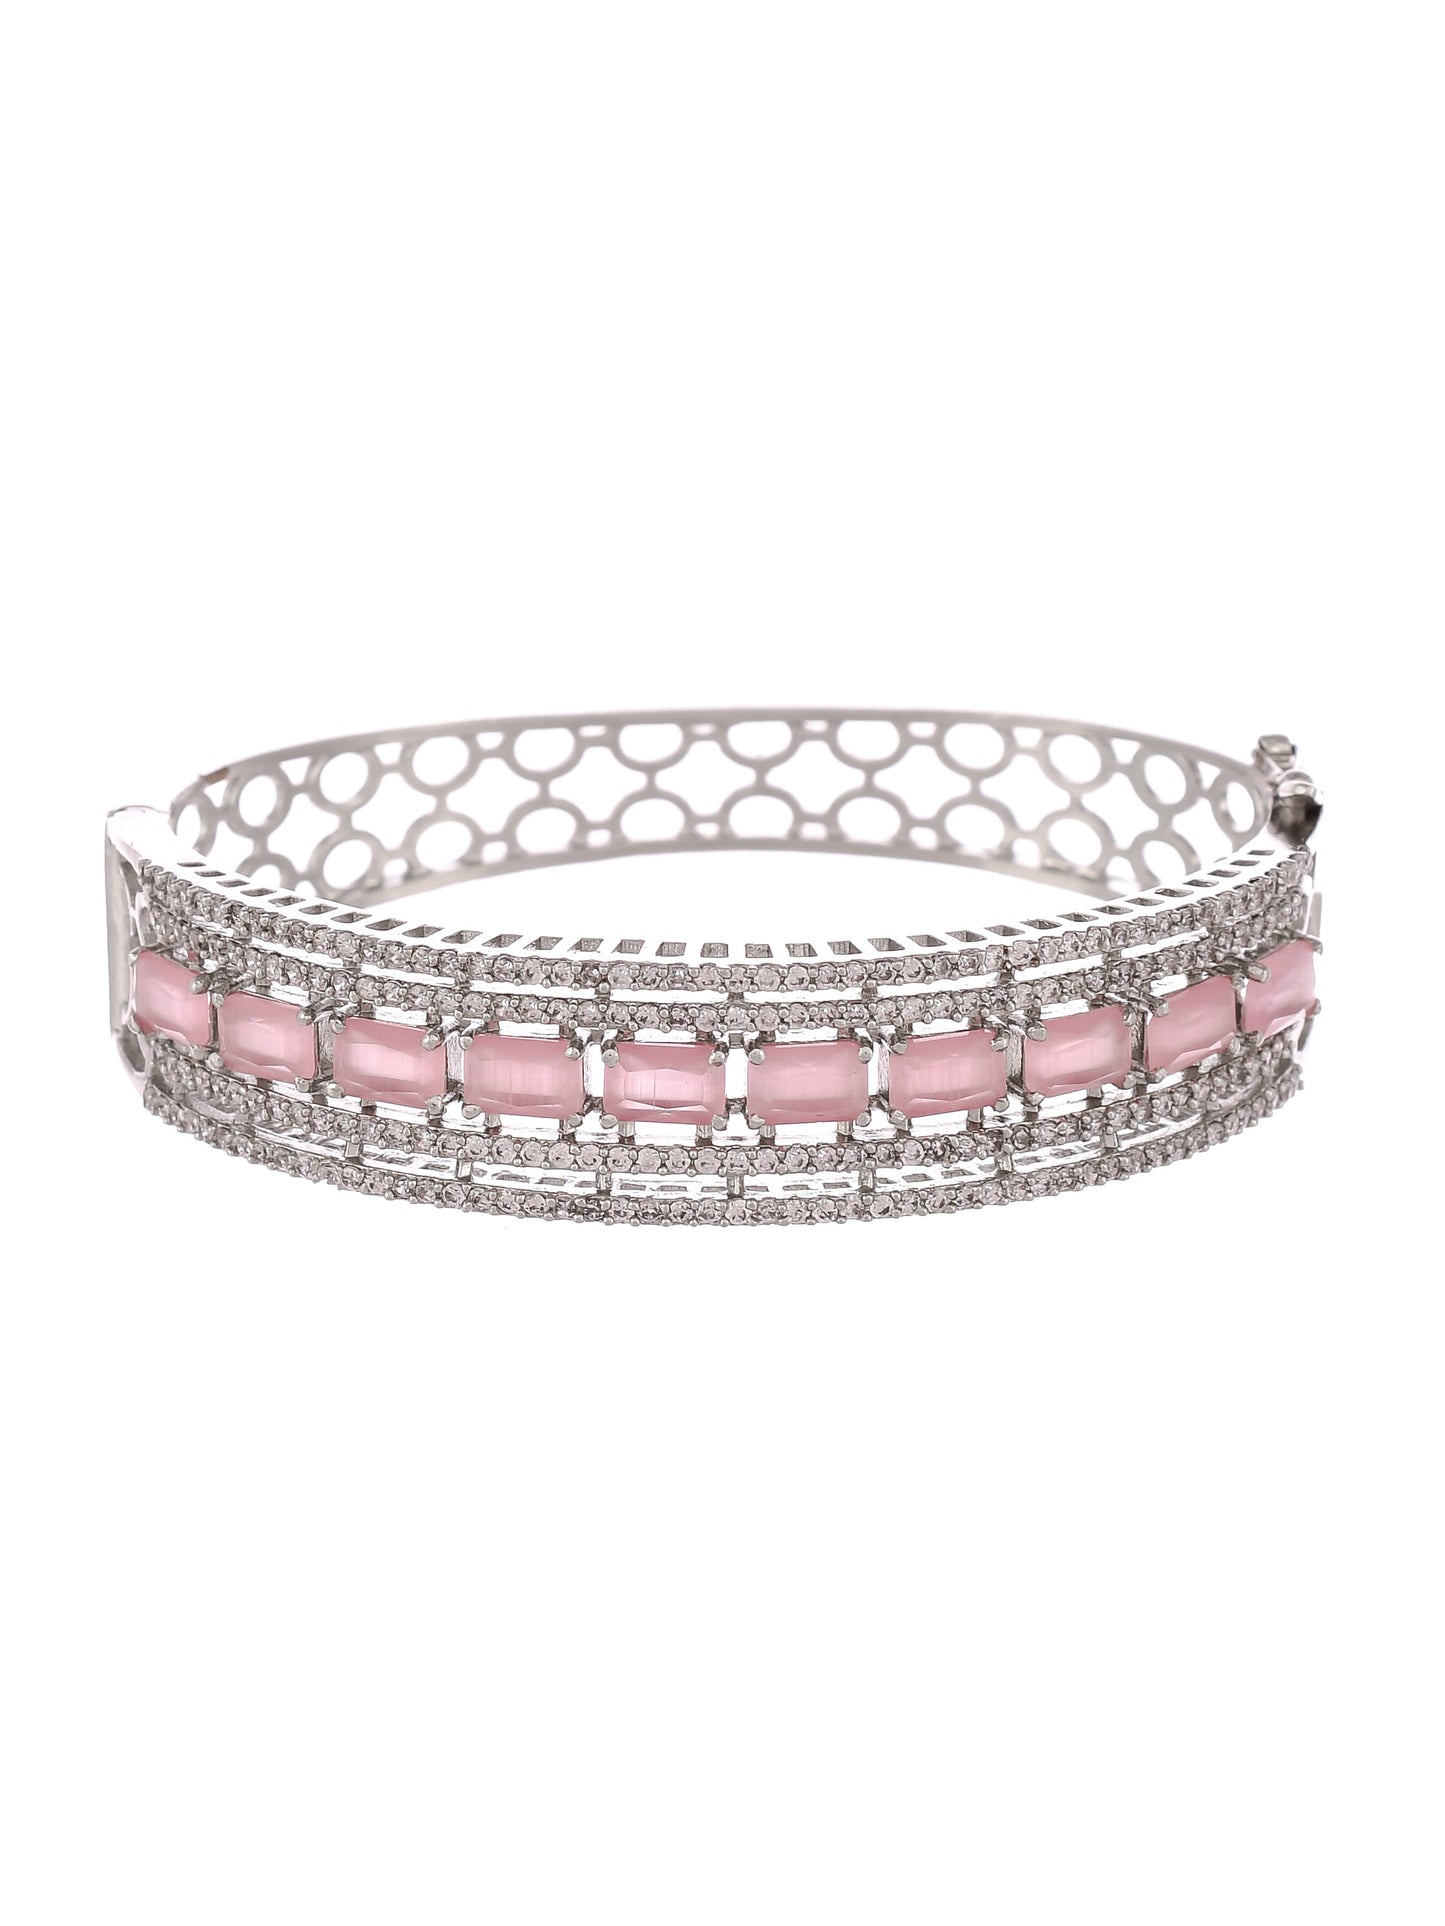 Women AD Pink Stone Bangle Style Silver Plated Bracelet